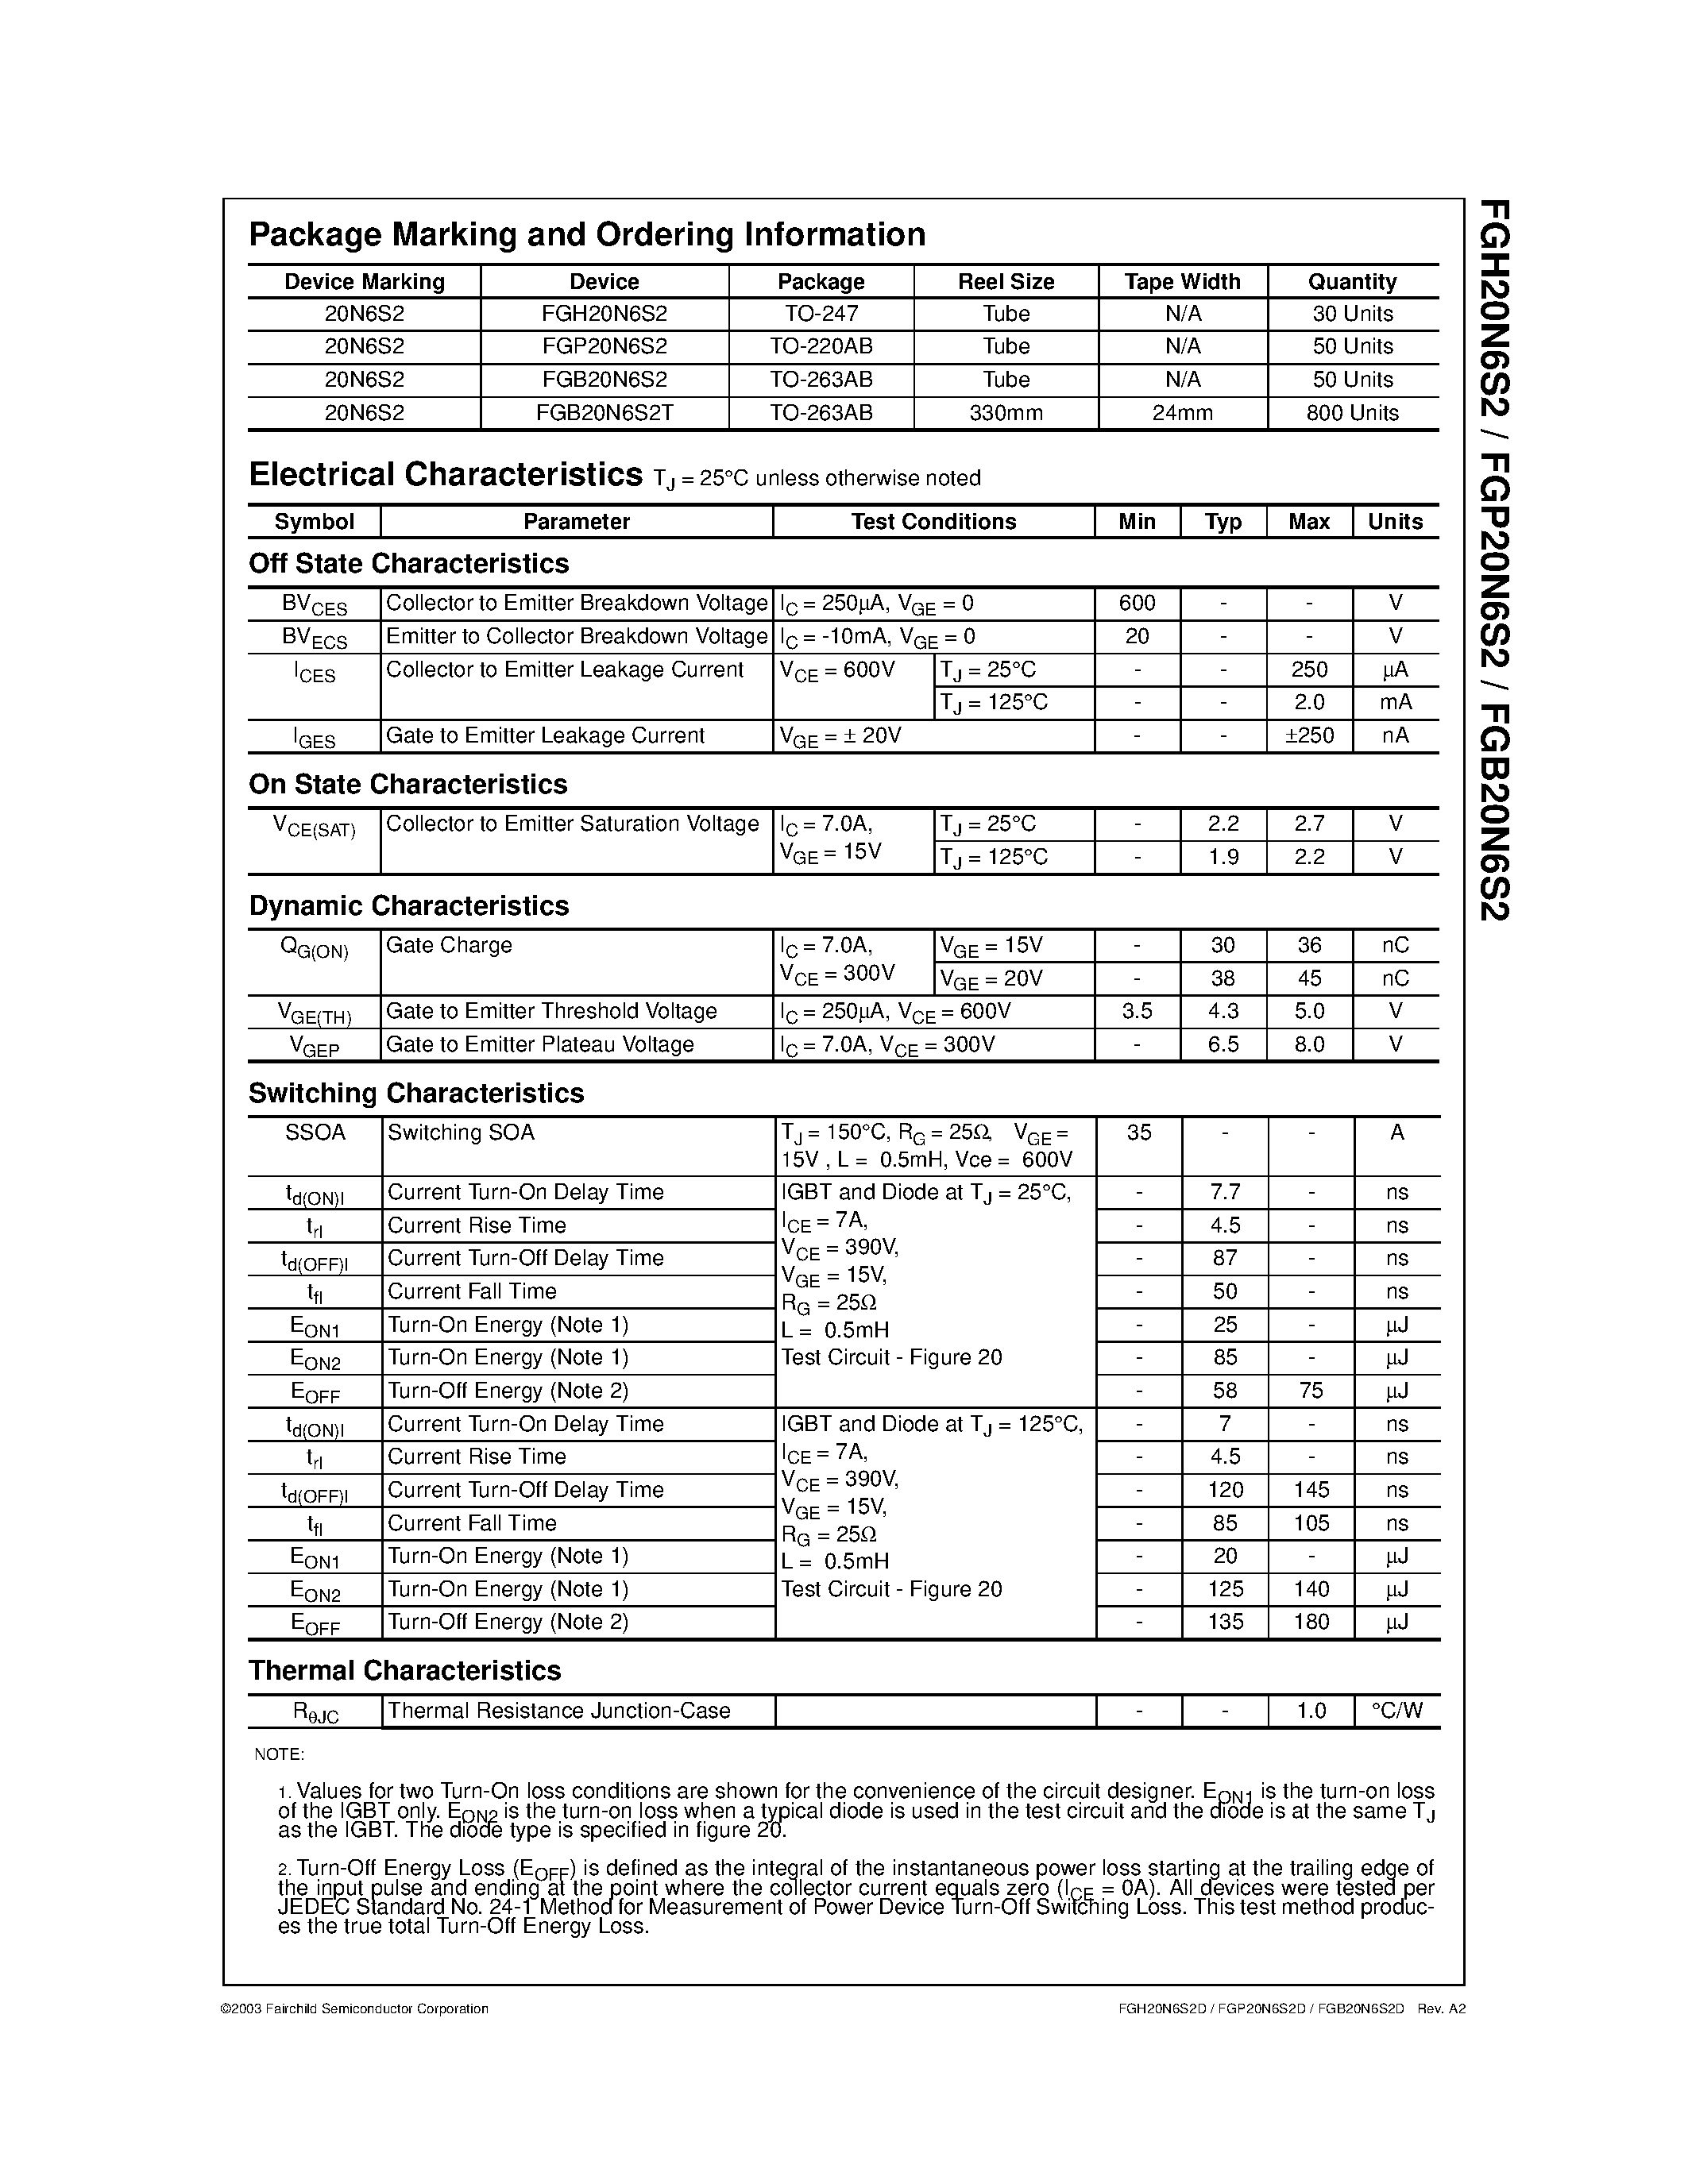 Datasheet FGB20N6S2 - 600V/ SMPS II Series N-Channel IGBT page 2